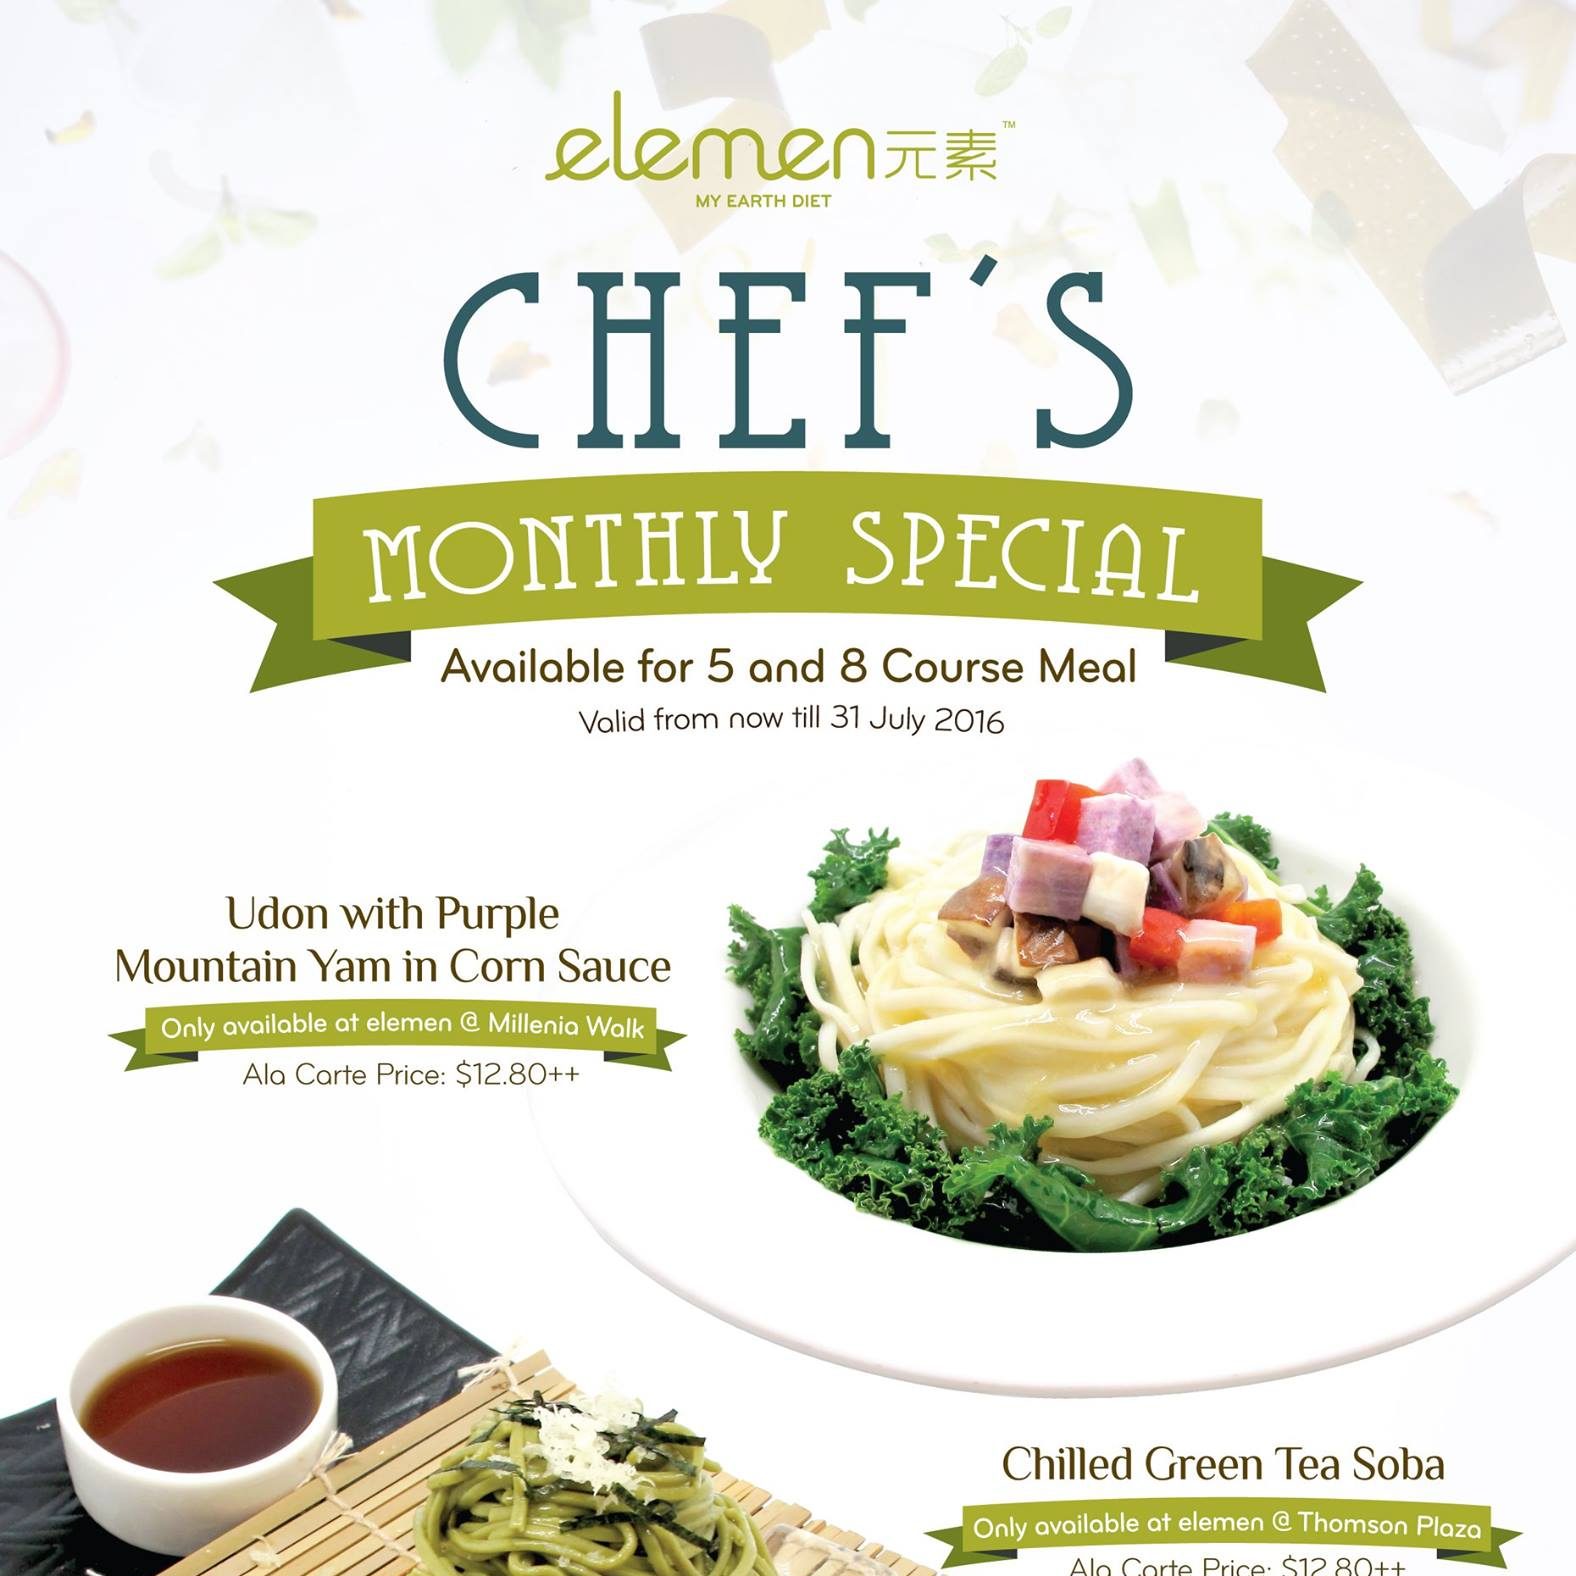 Elemen Chef’s Monthly Special Singapore Promotion ends 31 Jul 2016